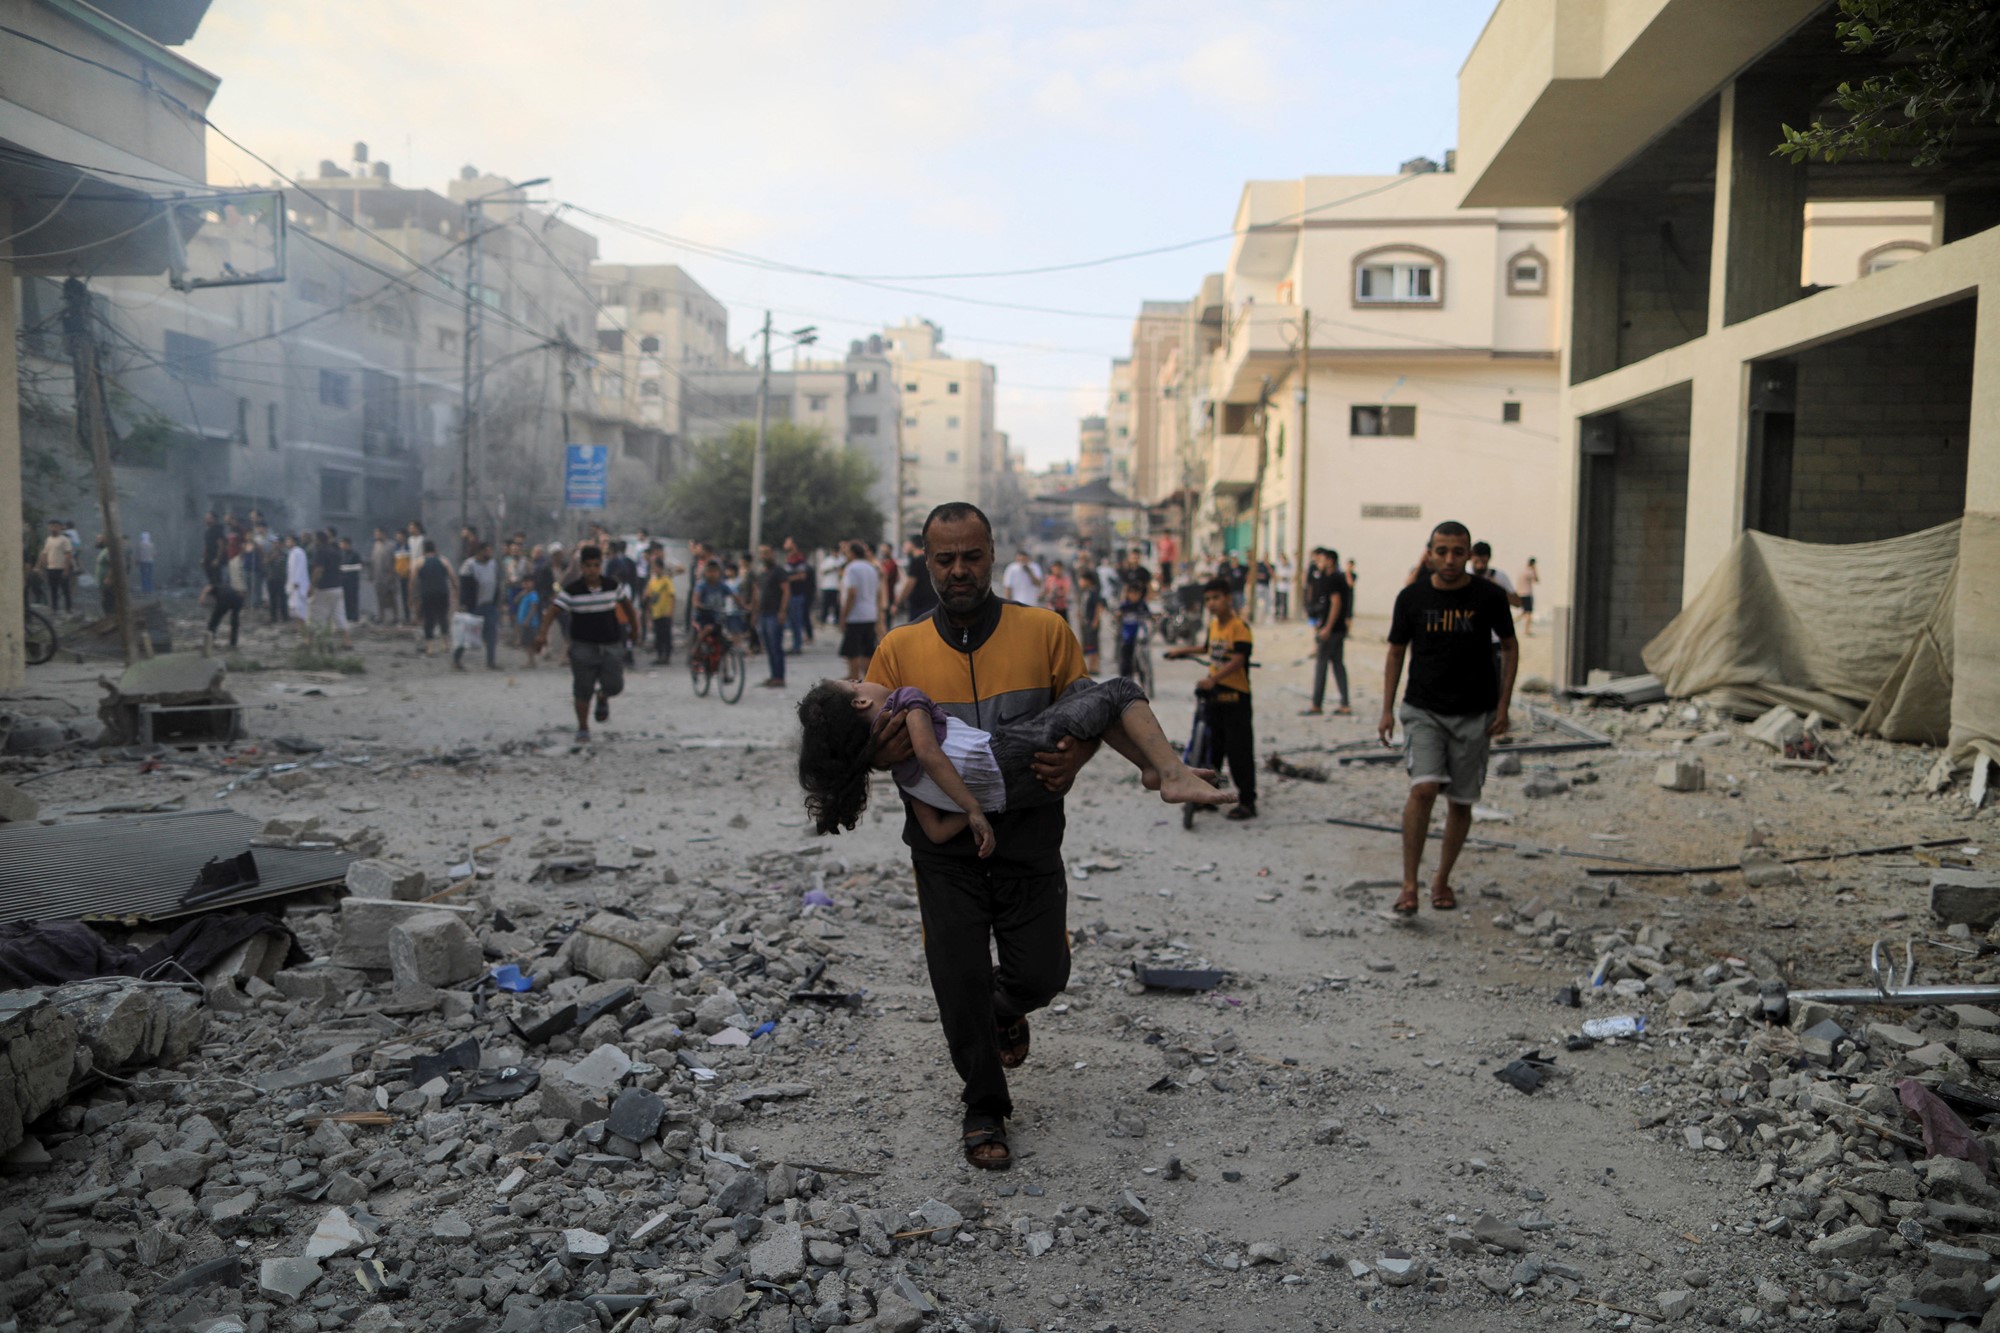 A man carries a child in his arms, down a street strewn with rubble